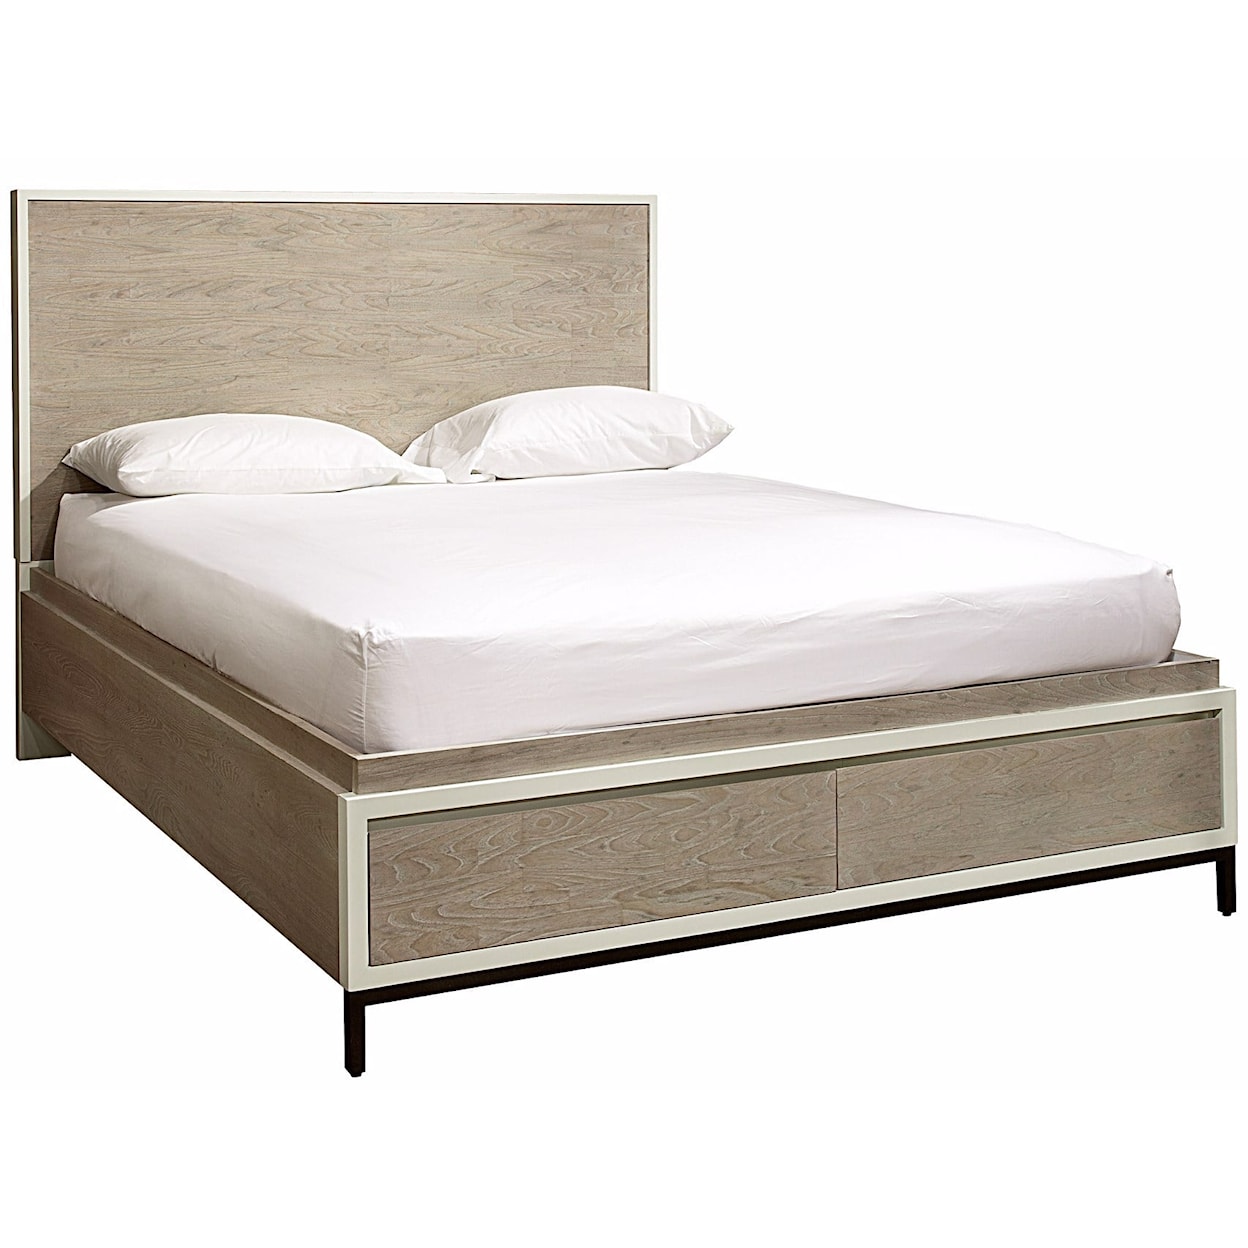 Universal Curated Queen Bed